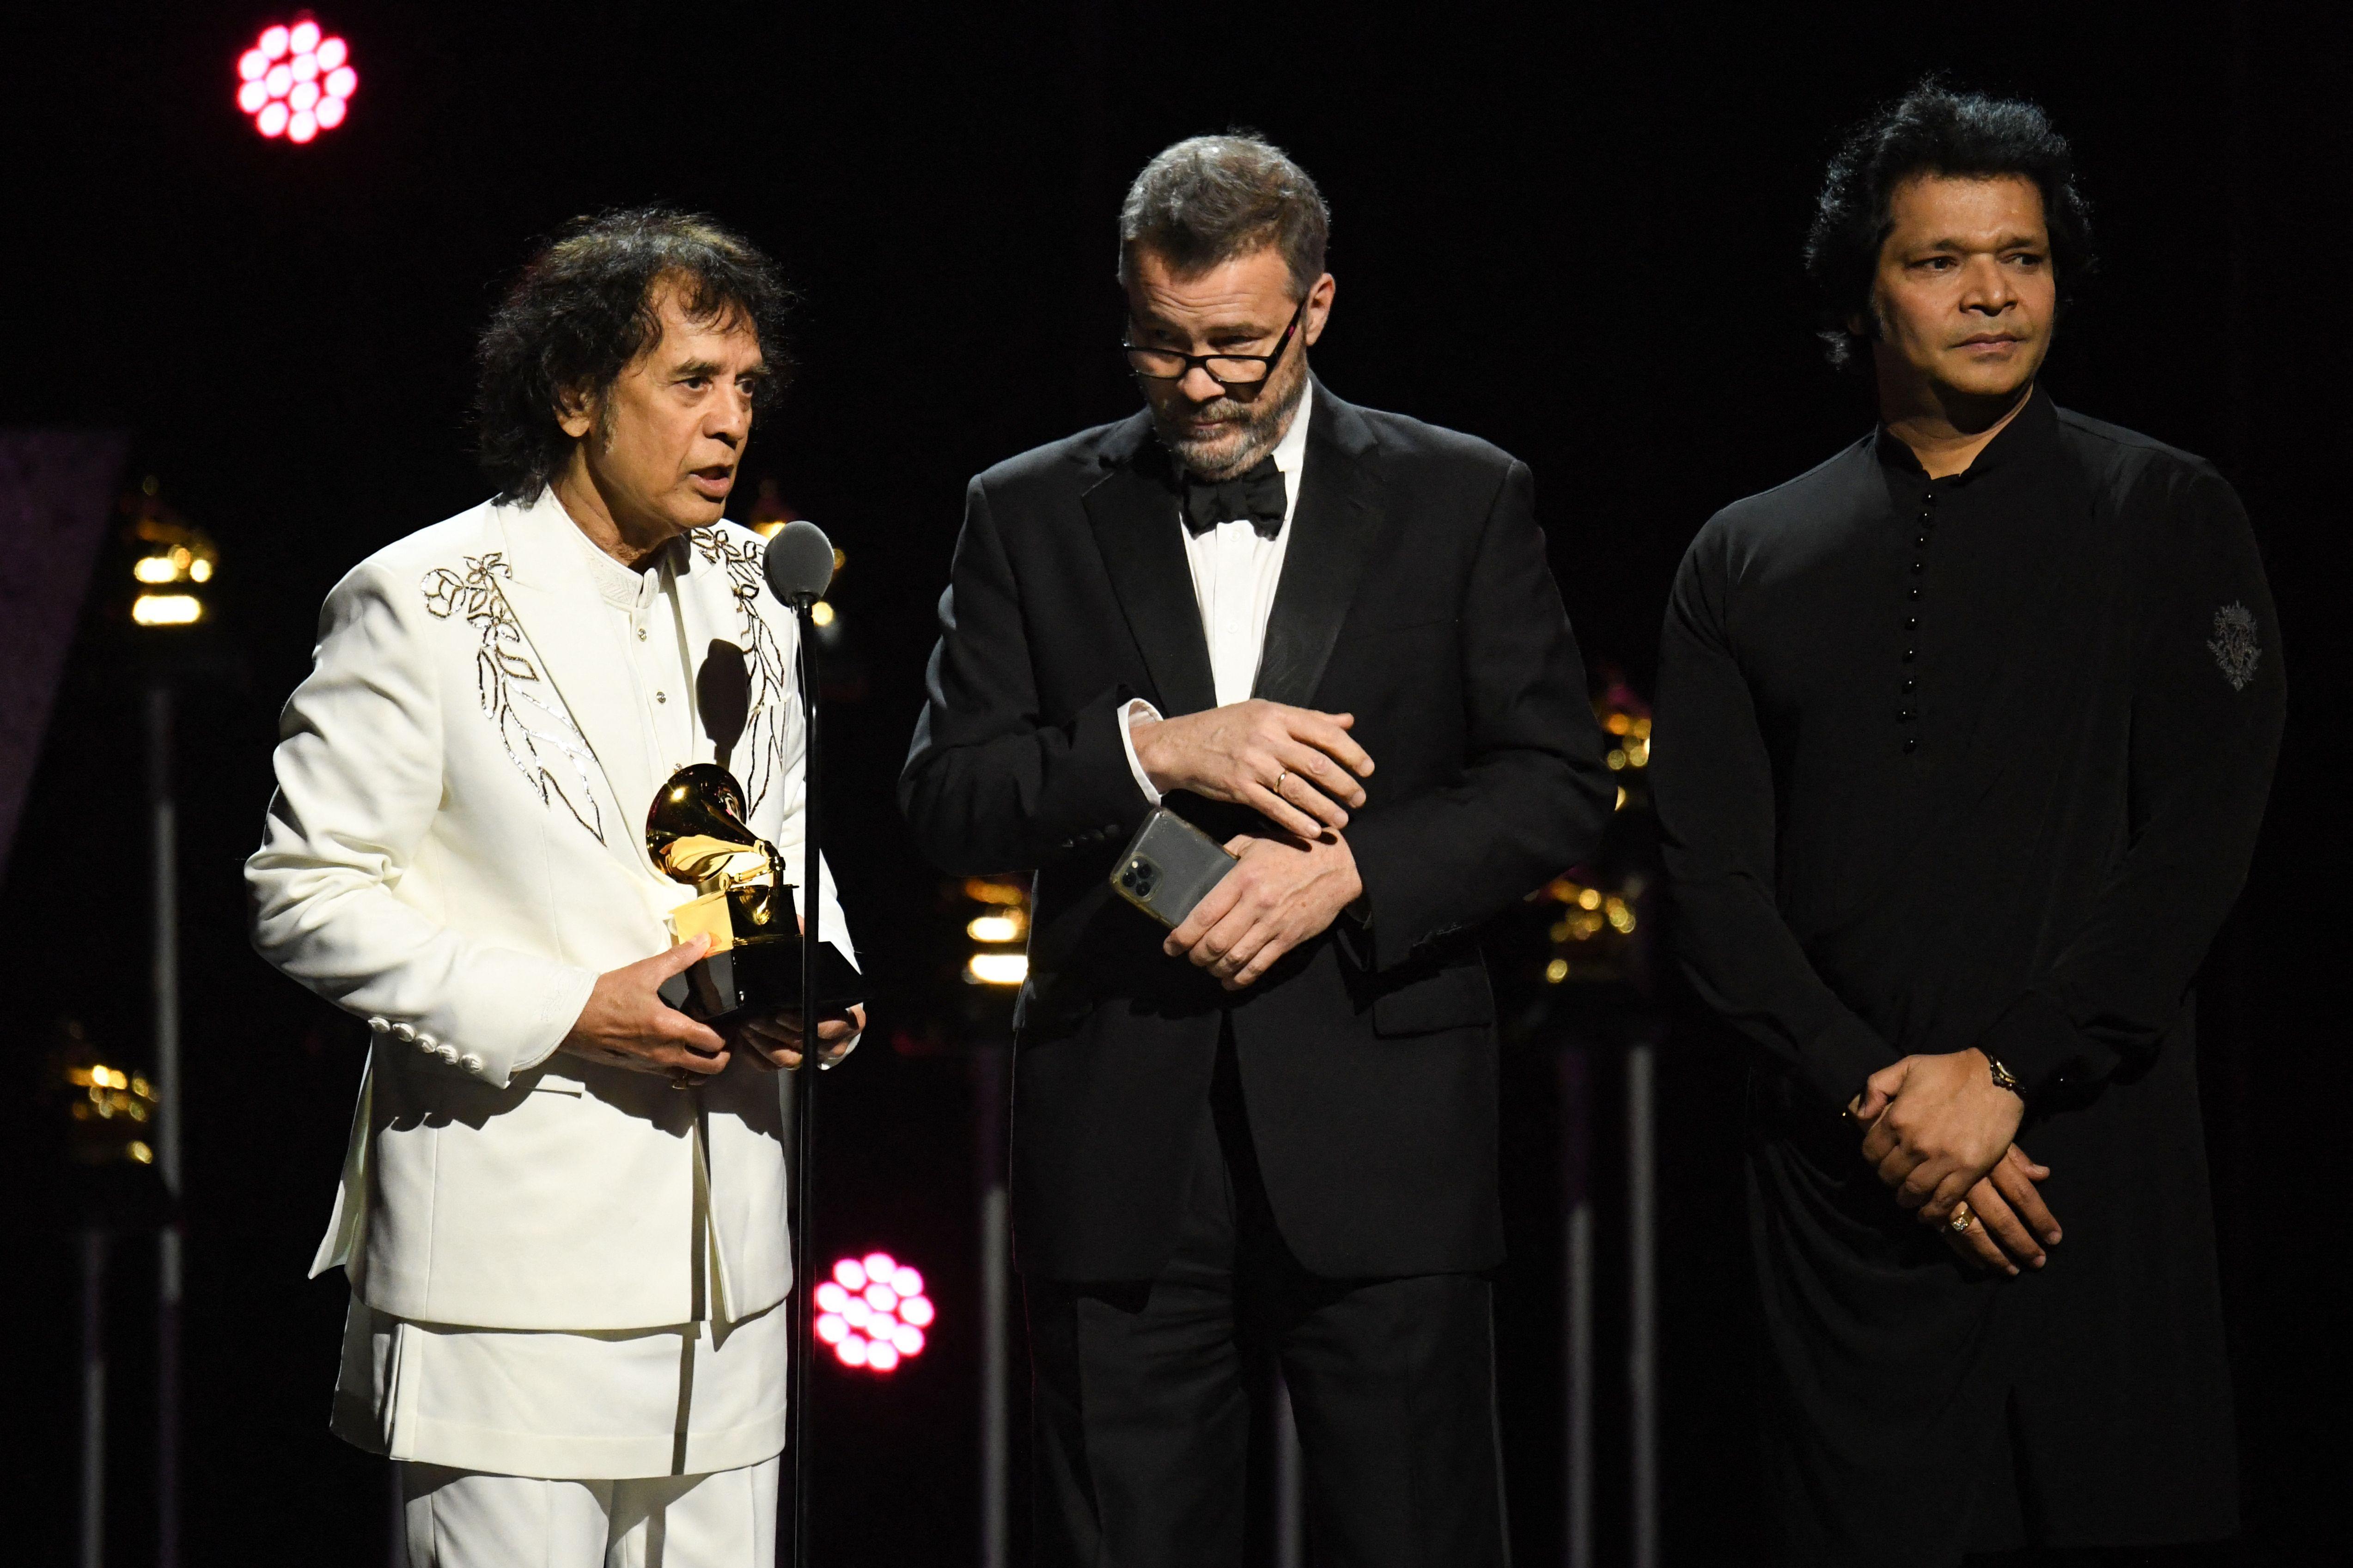 Tabla maestro Ustad Zakir Hussain's fusion group Shakti won the Grammy Award for best global music album for 'This Moment'. The album features four Indians - Hussain, Shankar Mahadevan, violinist Ganesh Rajagopalan and percussionist Selvaganesh Vinayakram - as well as its founding member, the legendary British guitarist John McLaughlin. (Photo: AFP)